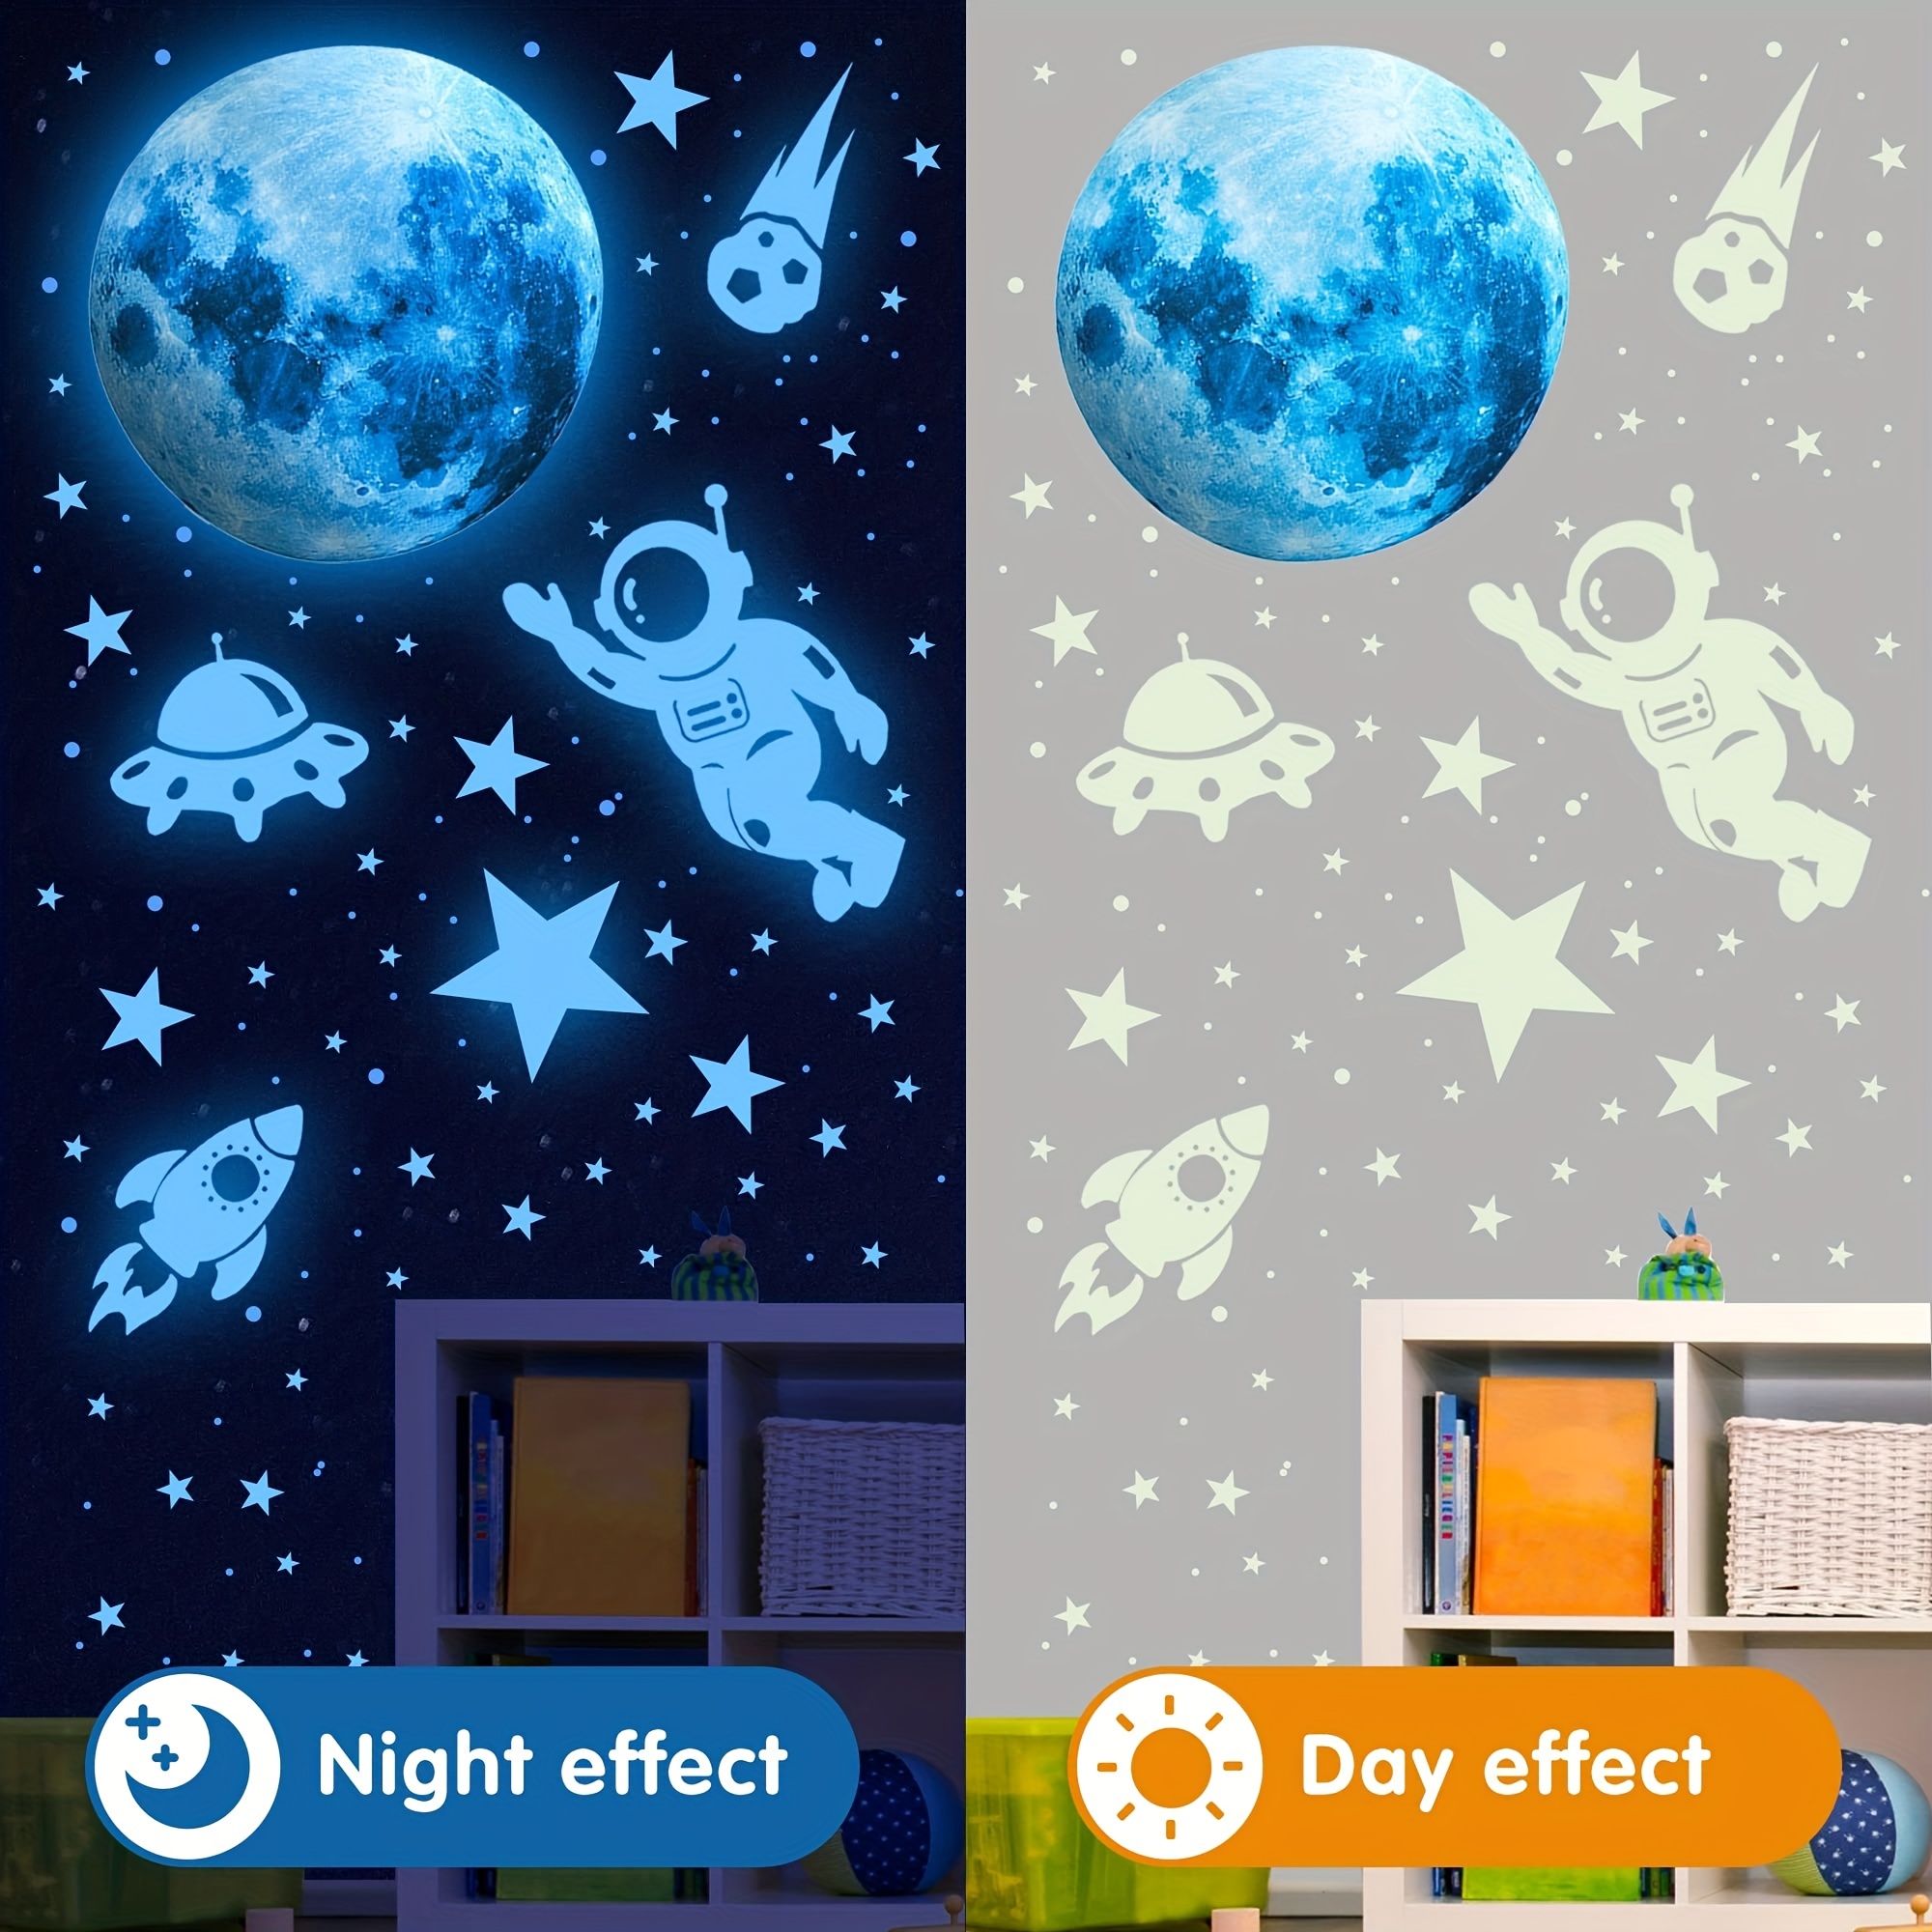 Glow in The Dark Stars,Glow in The Dark Stars and Moon for Ceiling Glow in The Dark Wall Decal Colorful Glowing Space Galaxy Wall Stickers for Kids